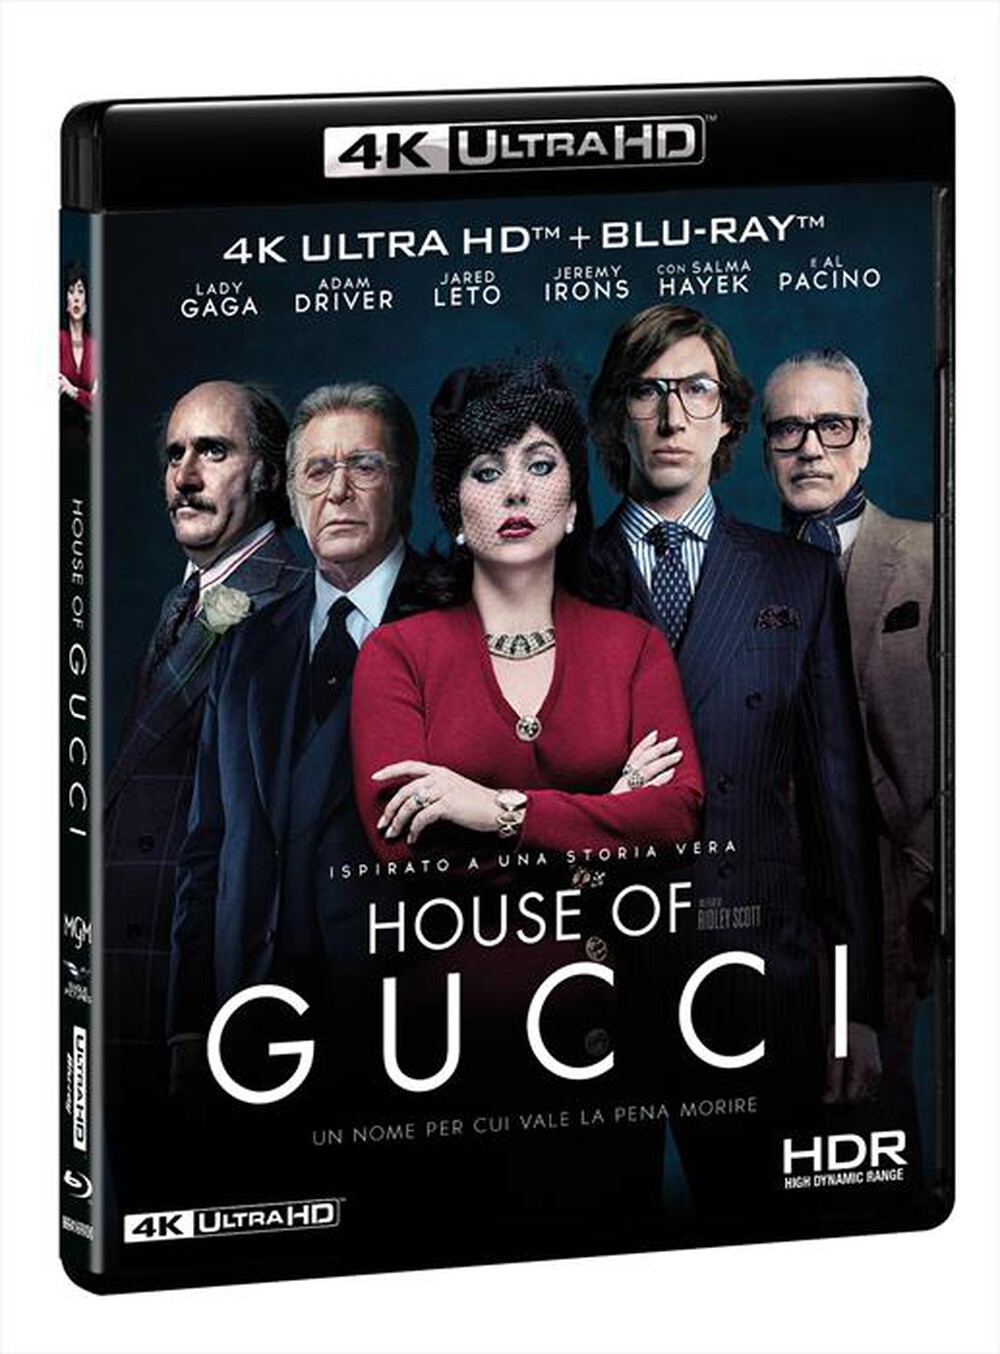 "EAGLE PICTURES - House Of Gucci (4K Ultra Hd+Blu-Ray)"